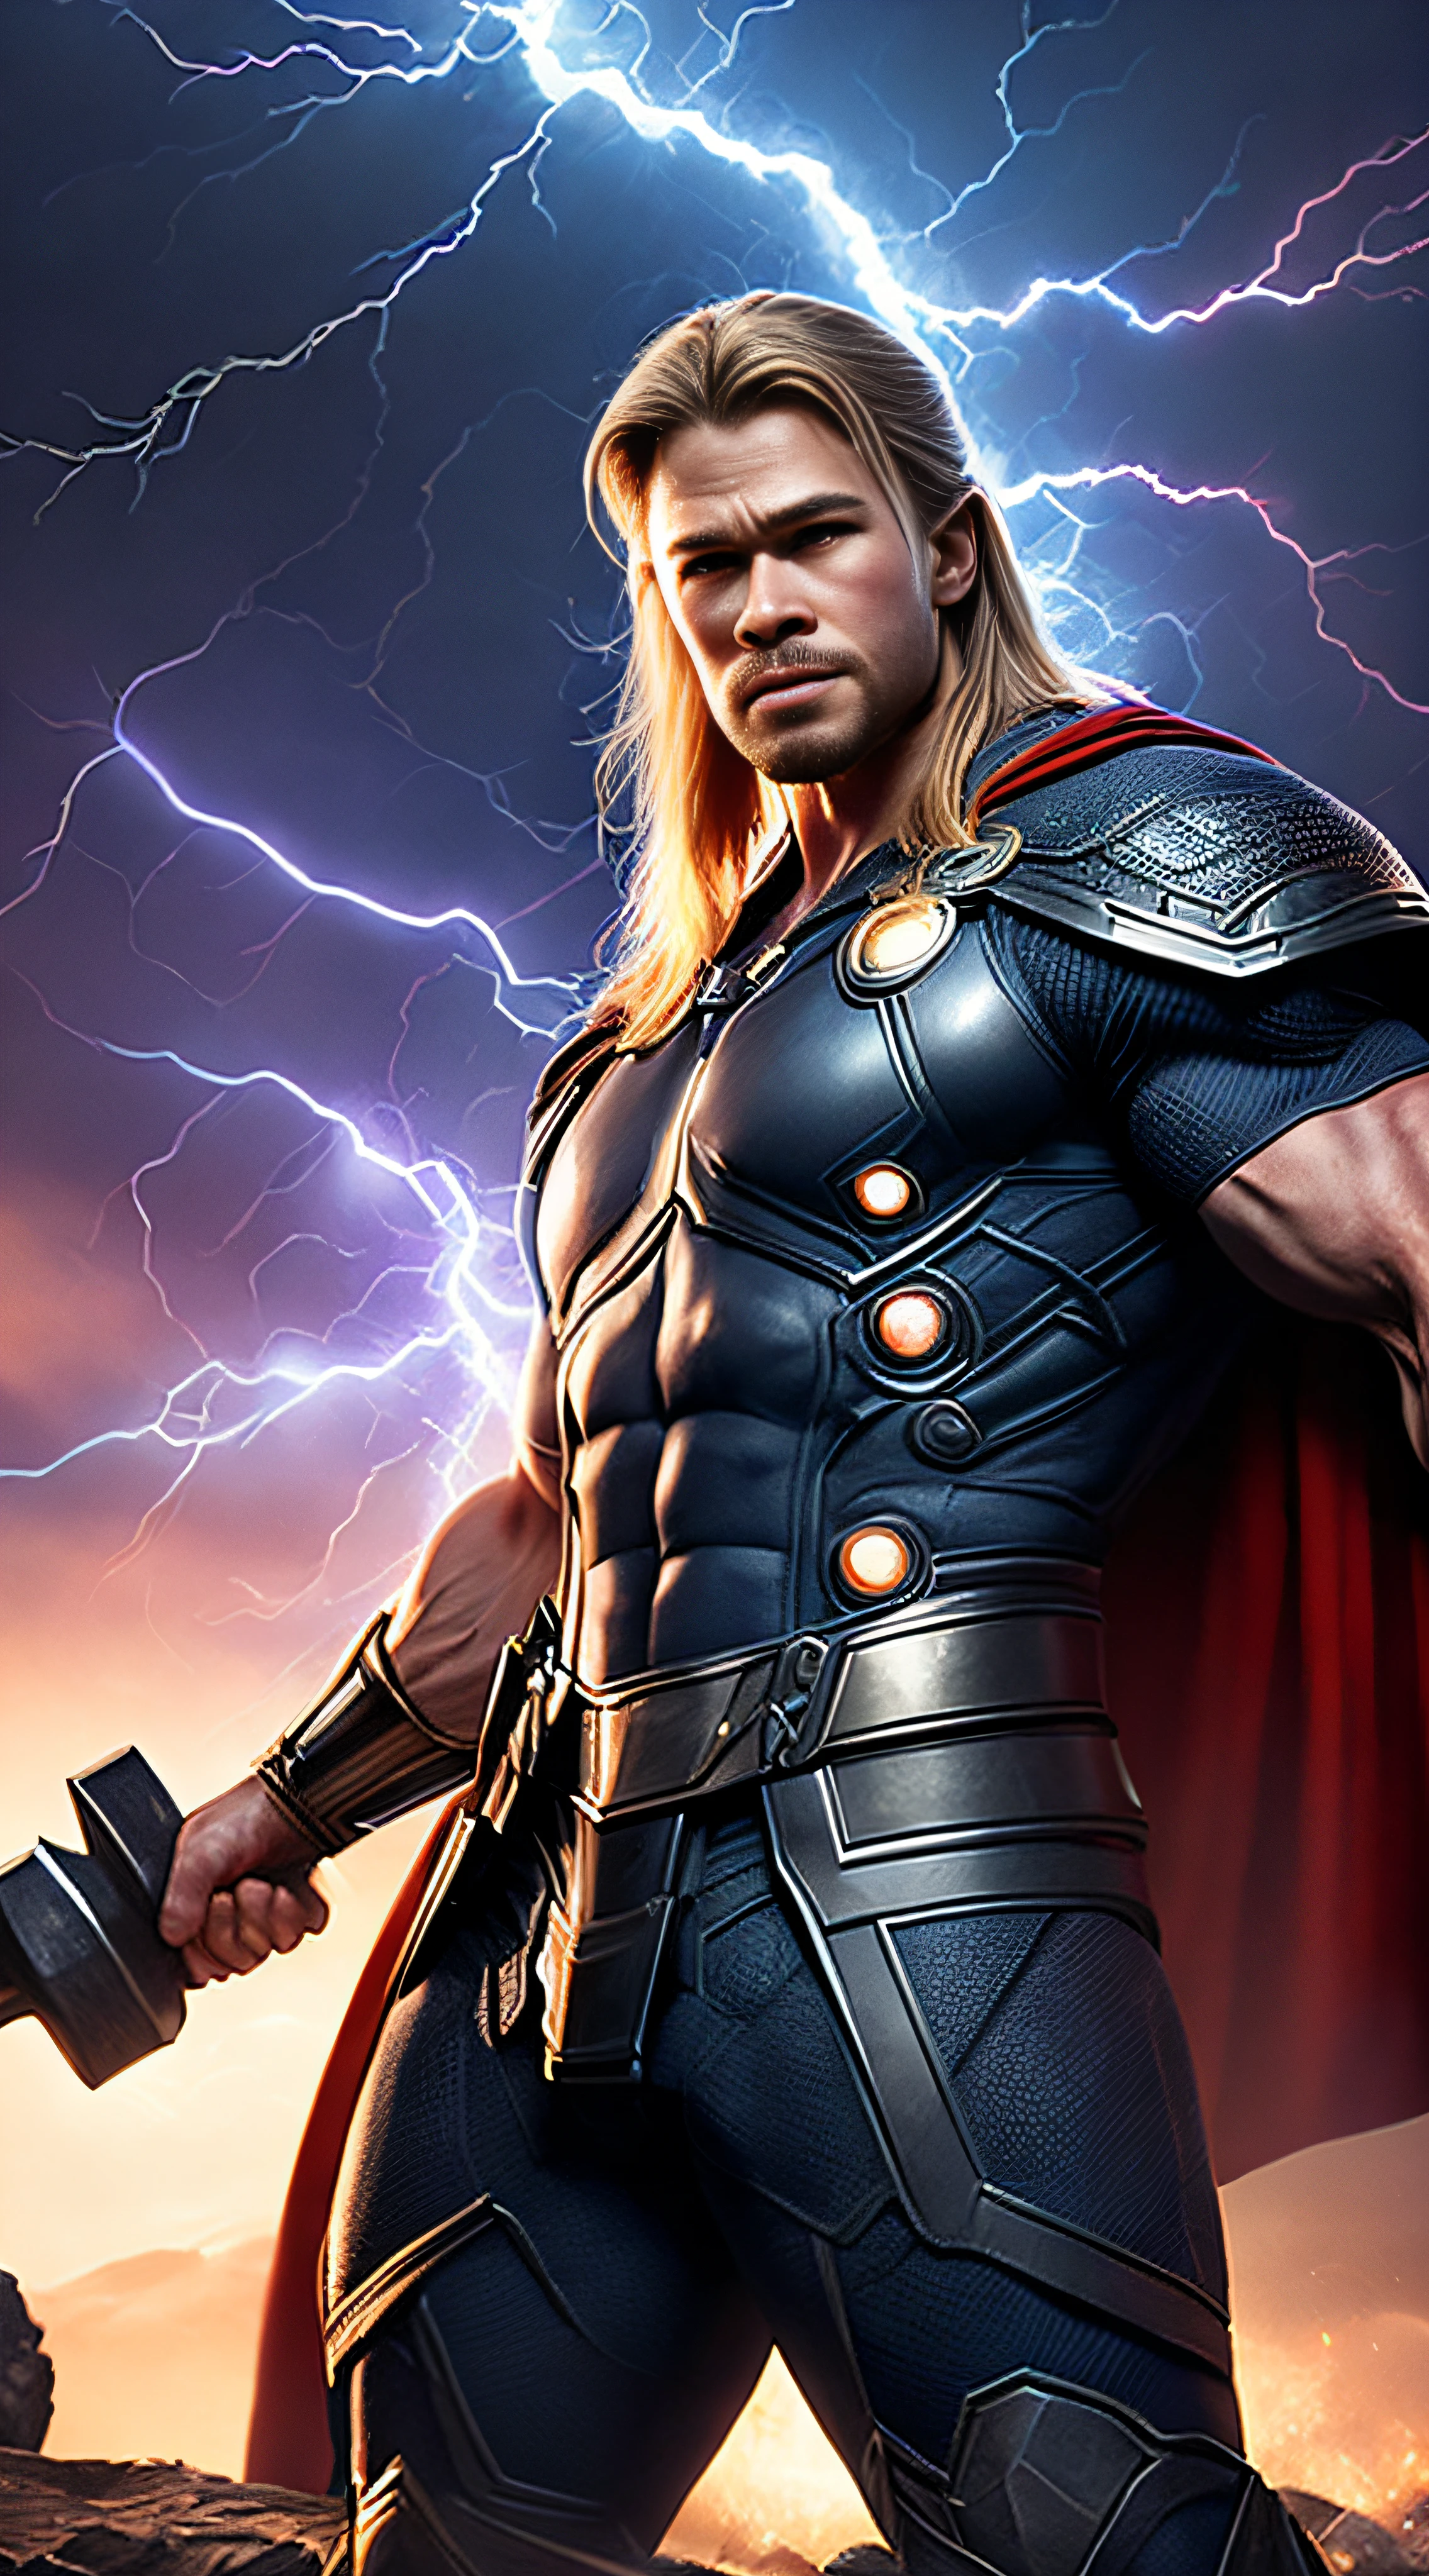 thor, avengers, wounds, angry, hyper realistic - SeaArt AI